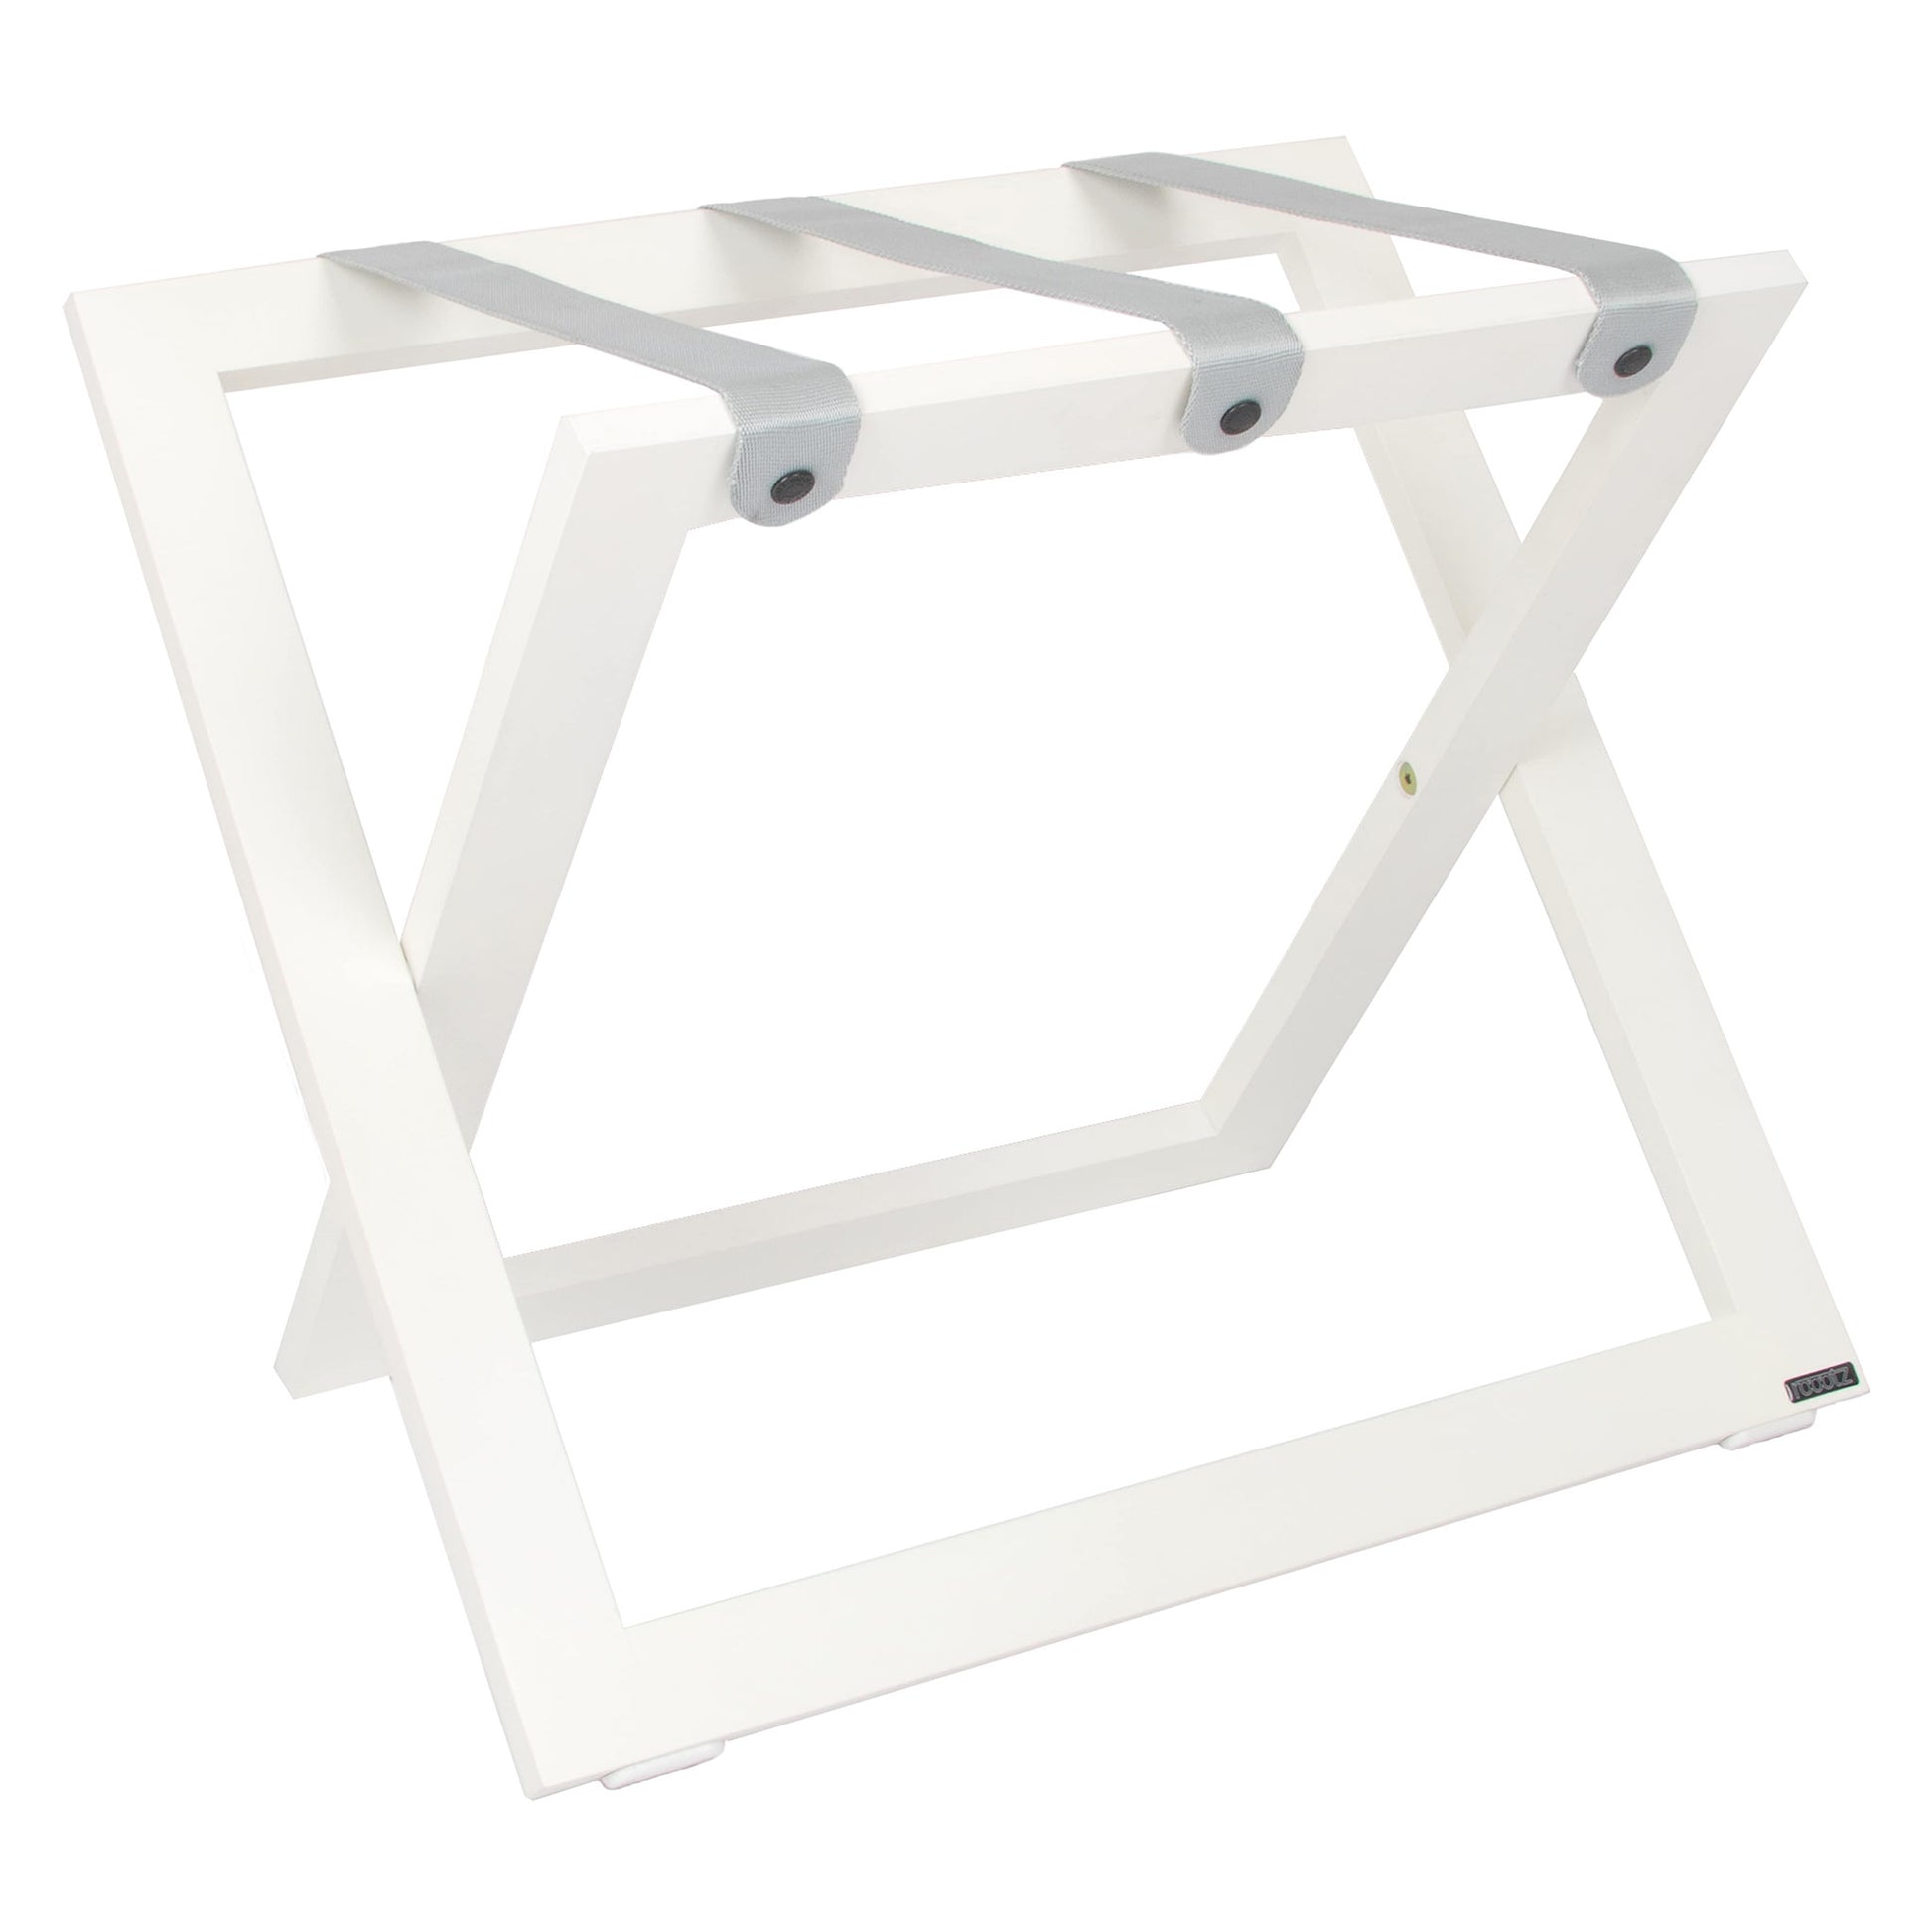 Roootz compact white wooden hotel luggage rack with grey nylon straps